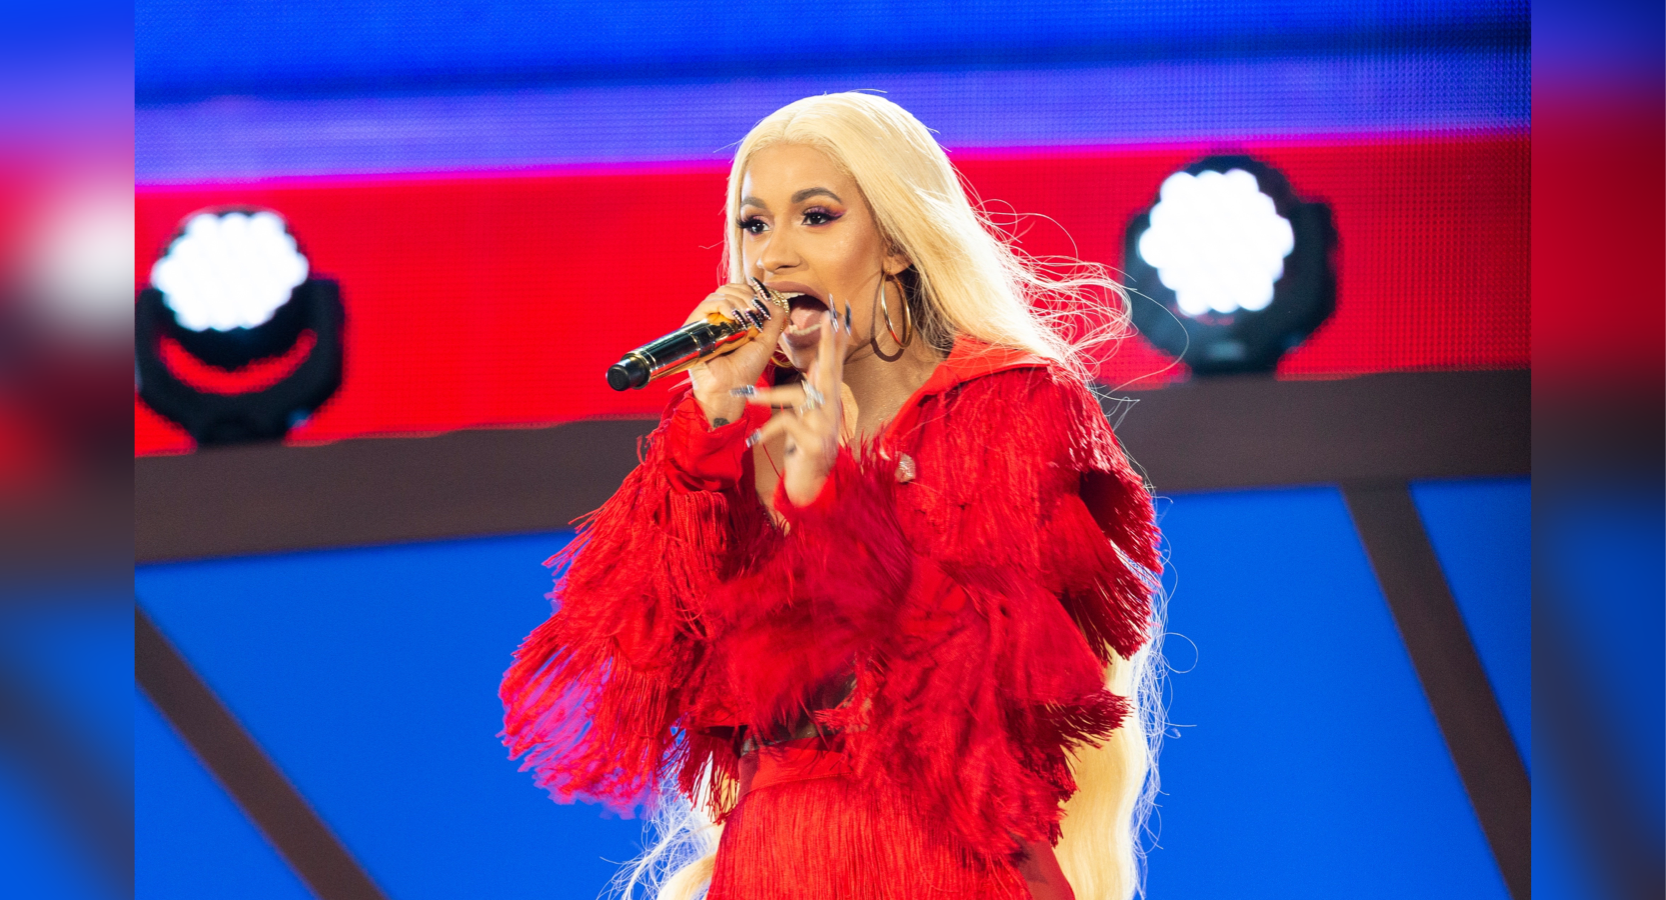 New York, NY - September 29, 2018: Cardi B performs on stage during 2018 Global Citizen Festival: Be The Generation in Central Park